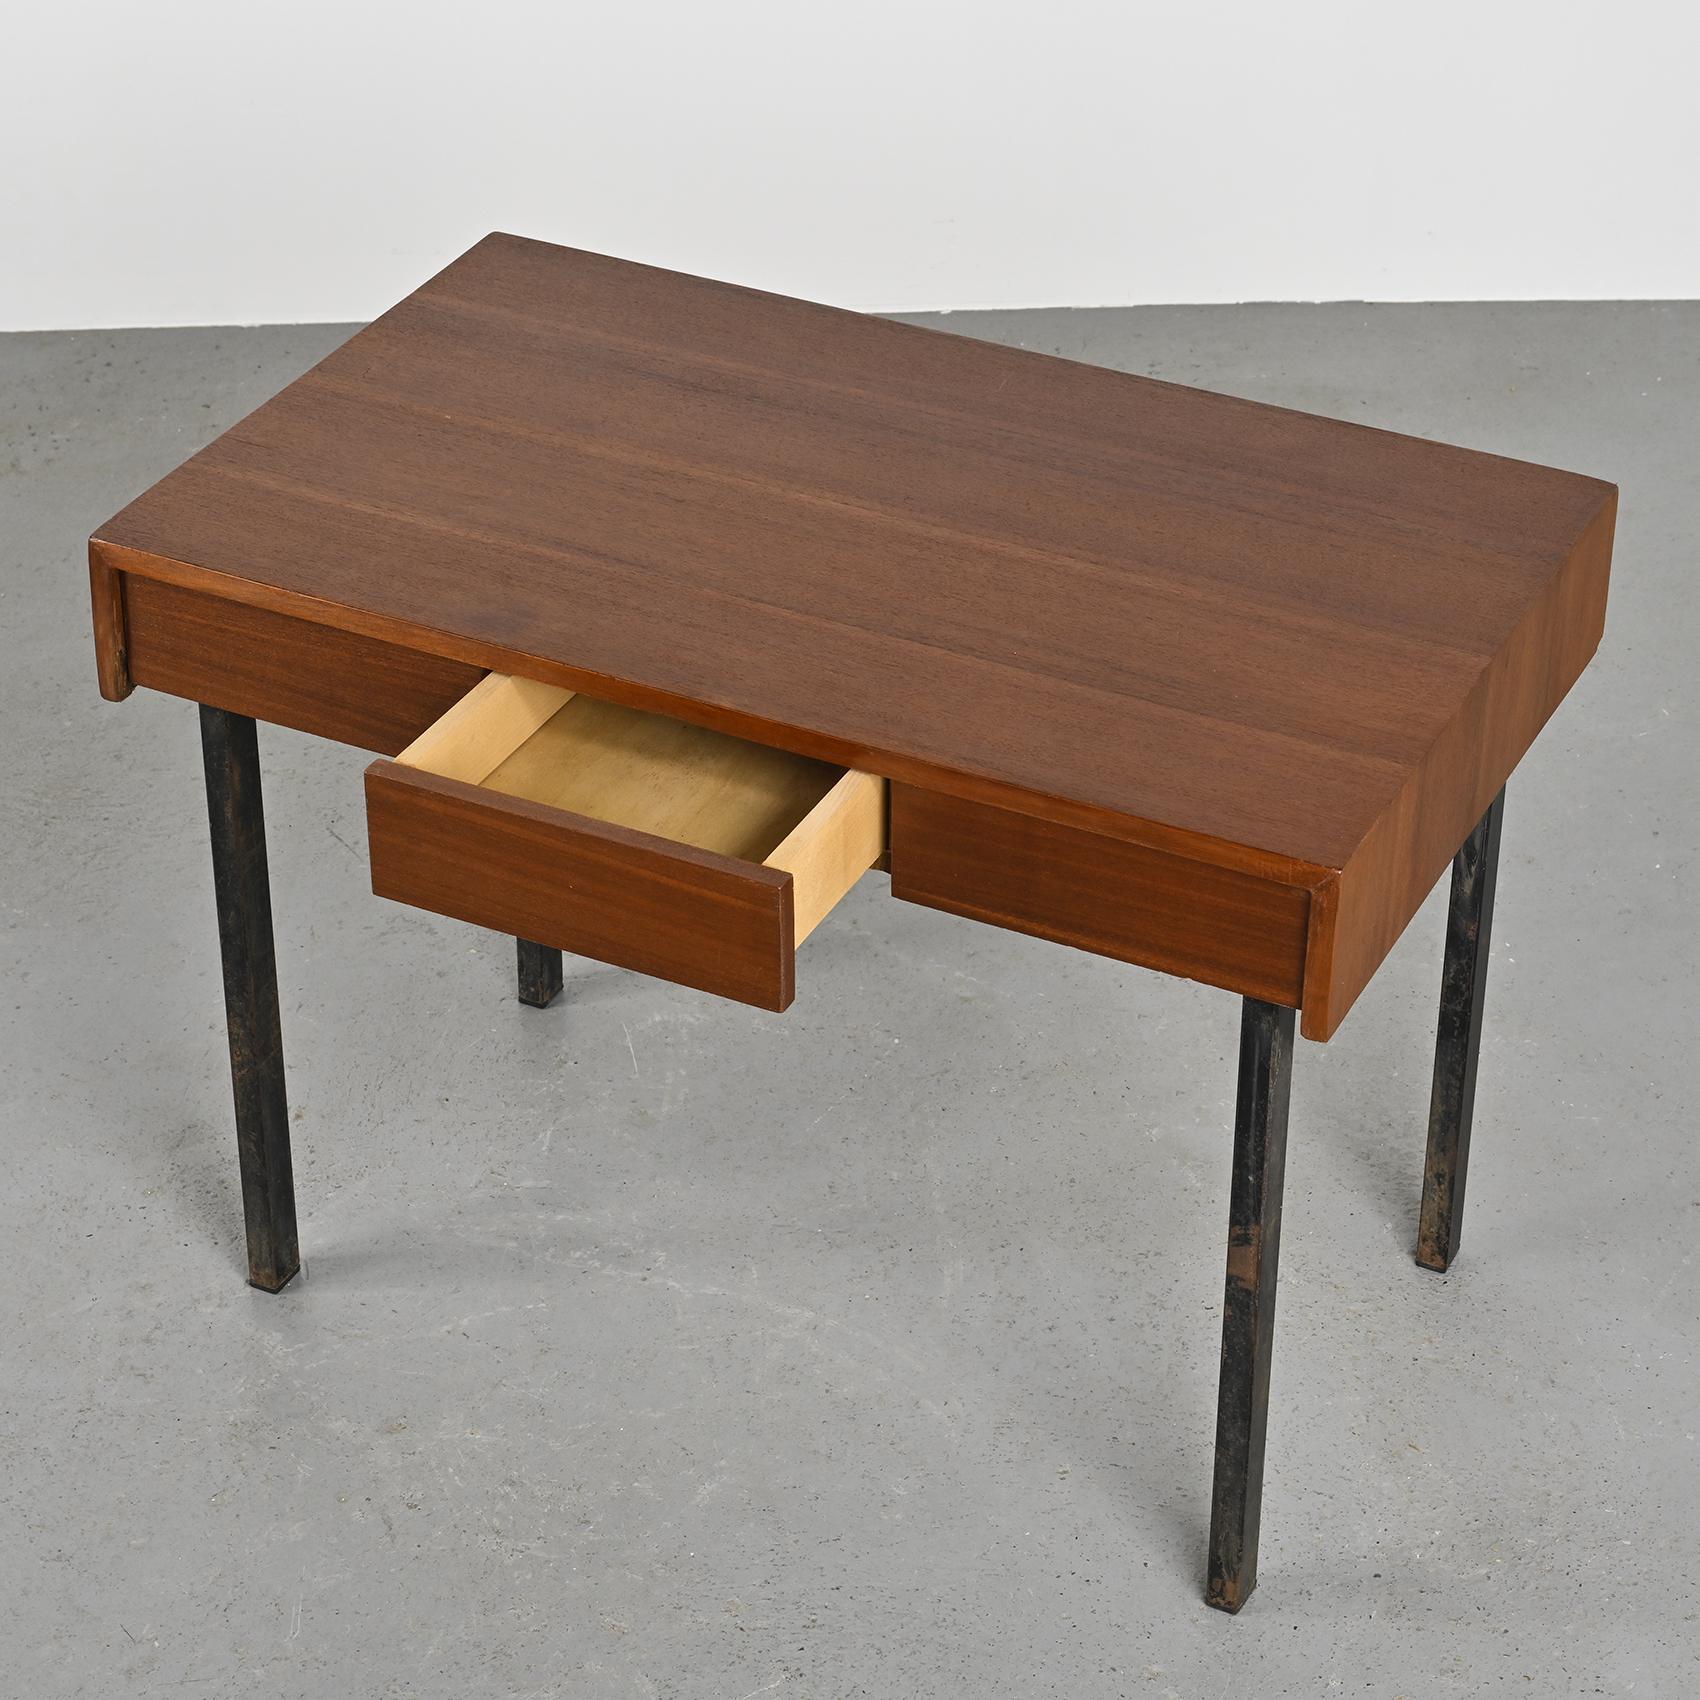 Mid-20th Century Cansado Desk by Charlotte Perriand, France circa 1960 For Sale